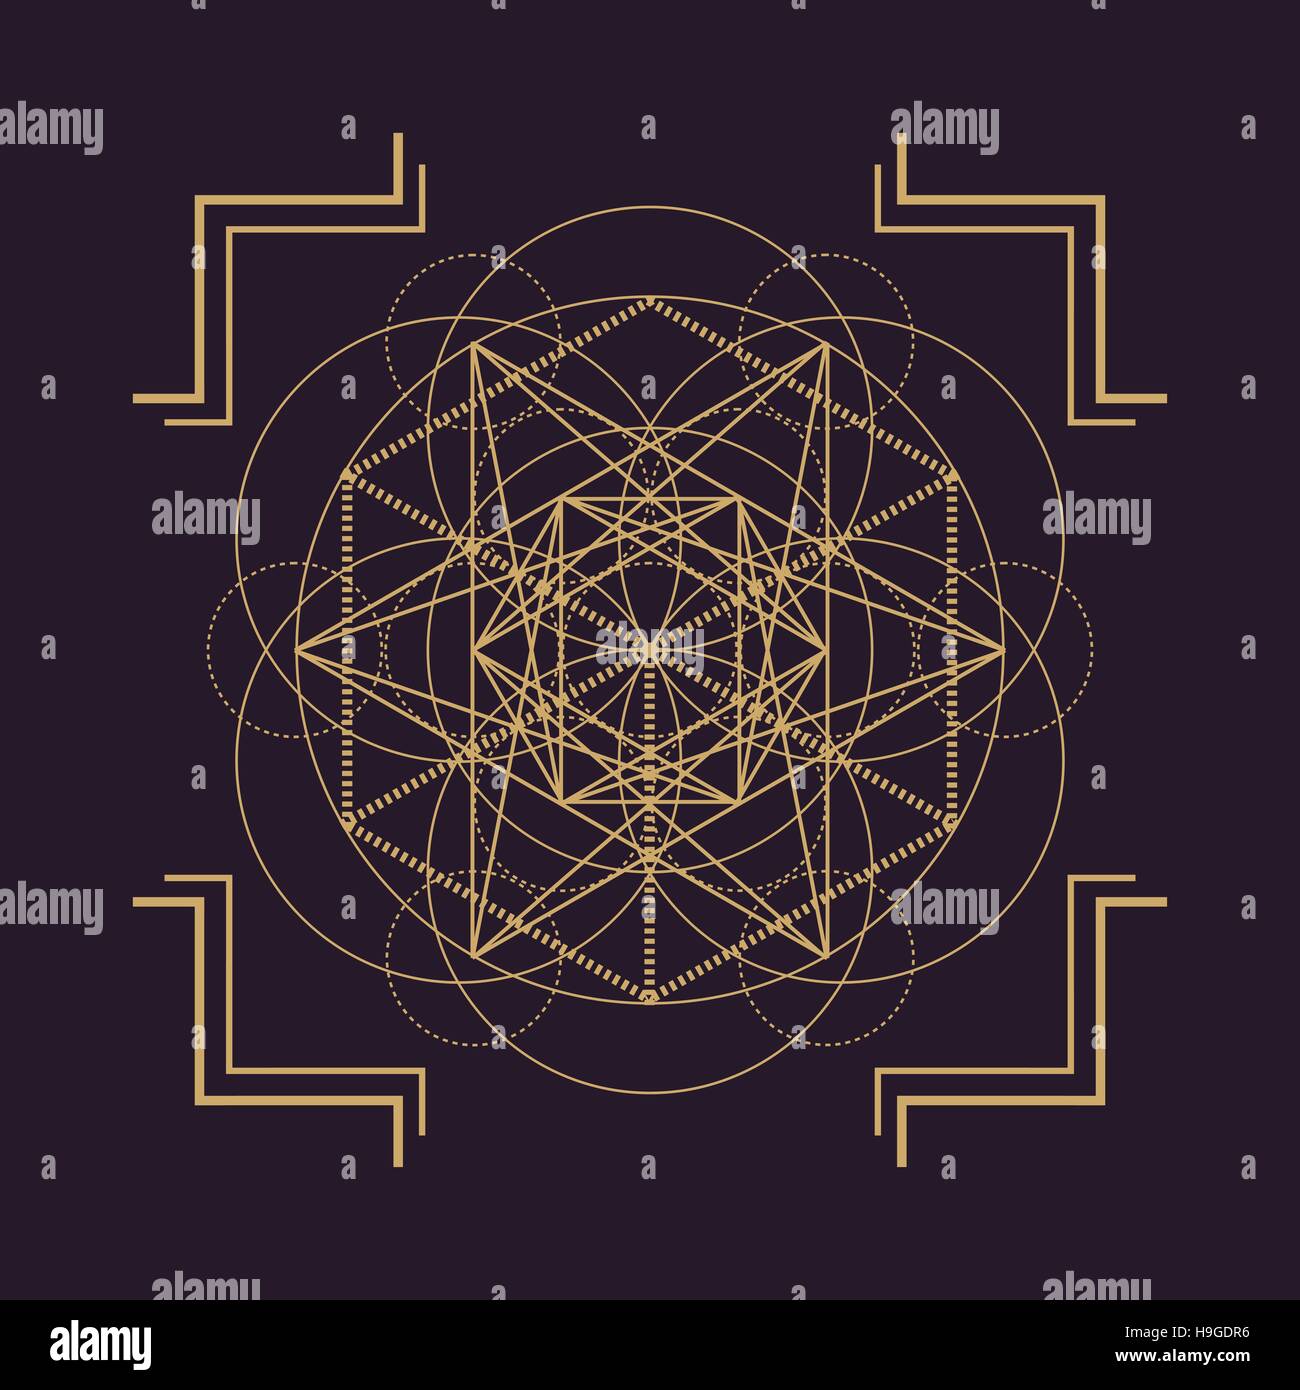 vector gold monochrome design abstract mandala sacred geometry illustration Metatron's cube circles isolated dark brown background Stock Vector